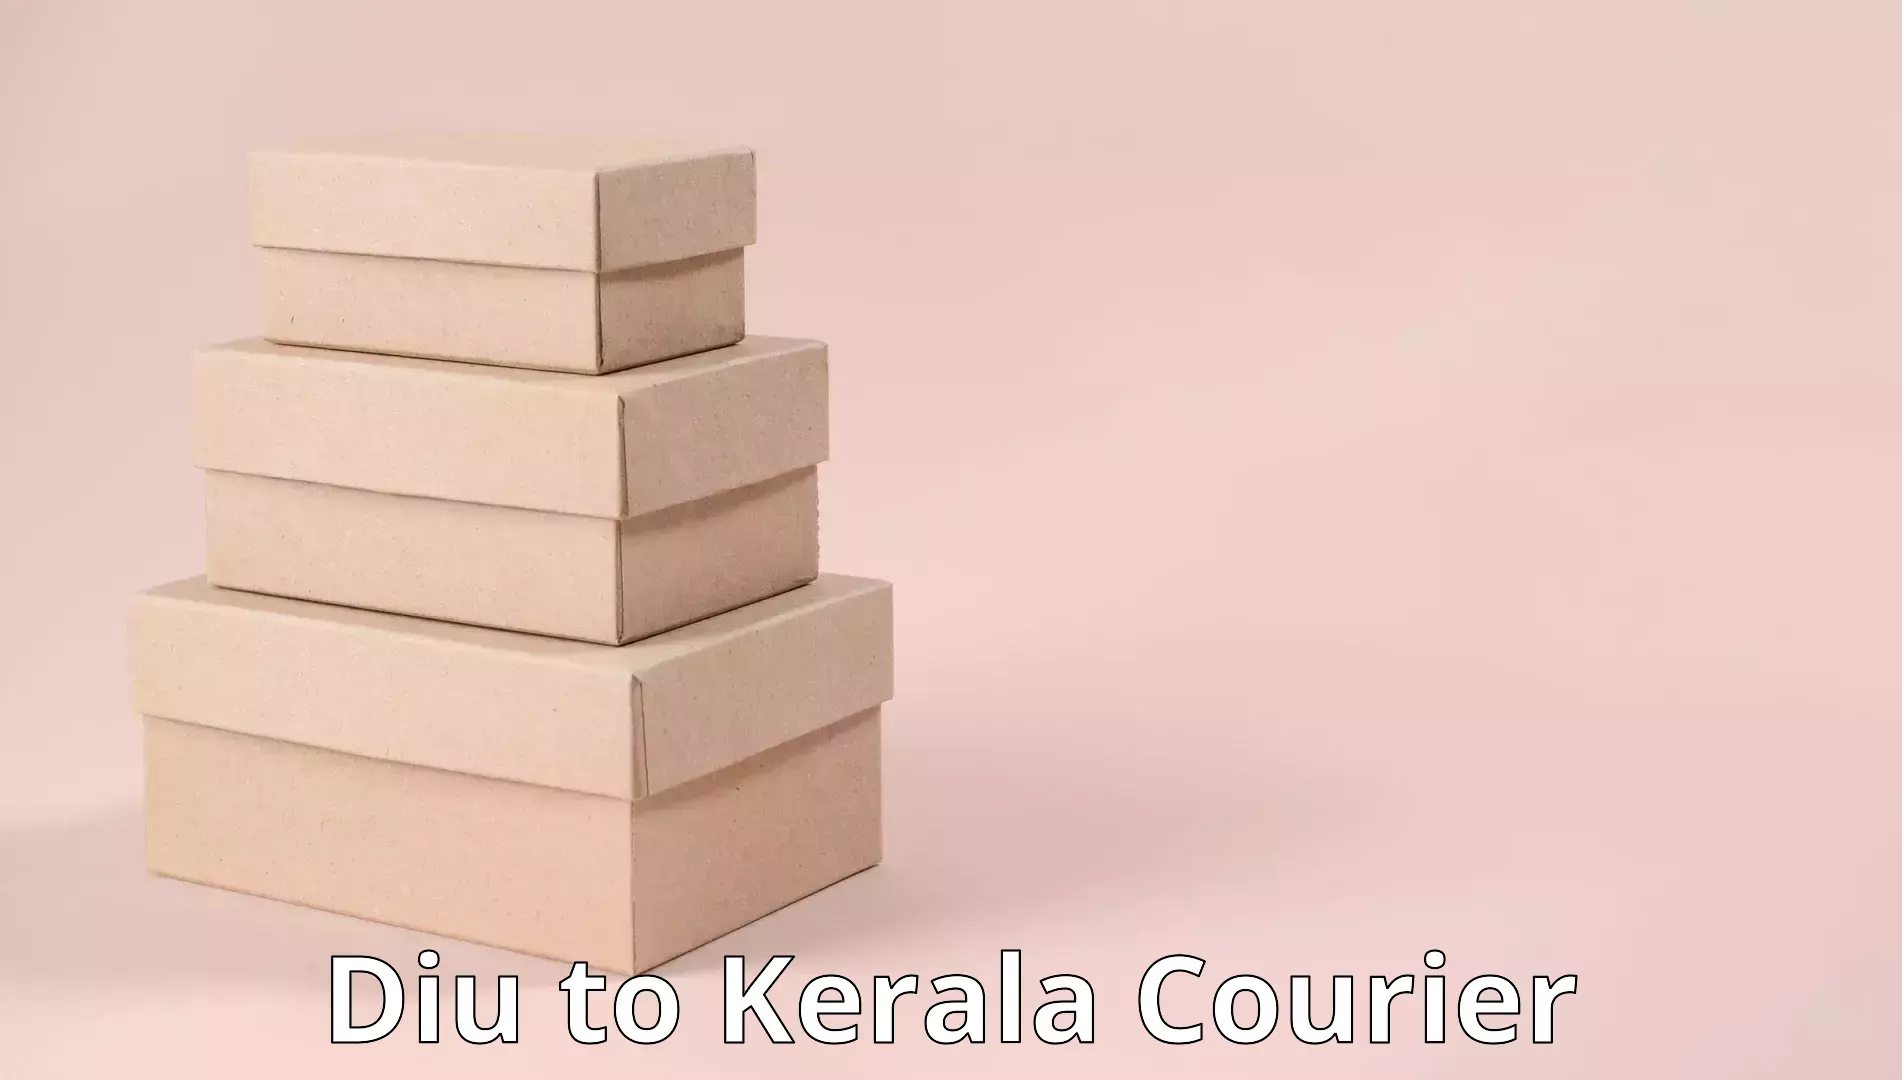 Trusted relocation services Diu to Kerala